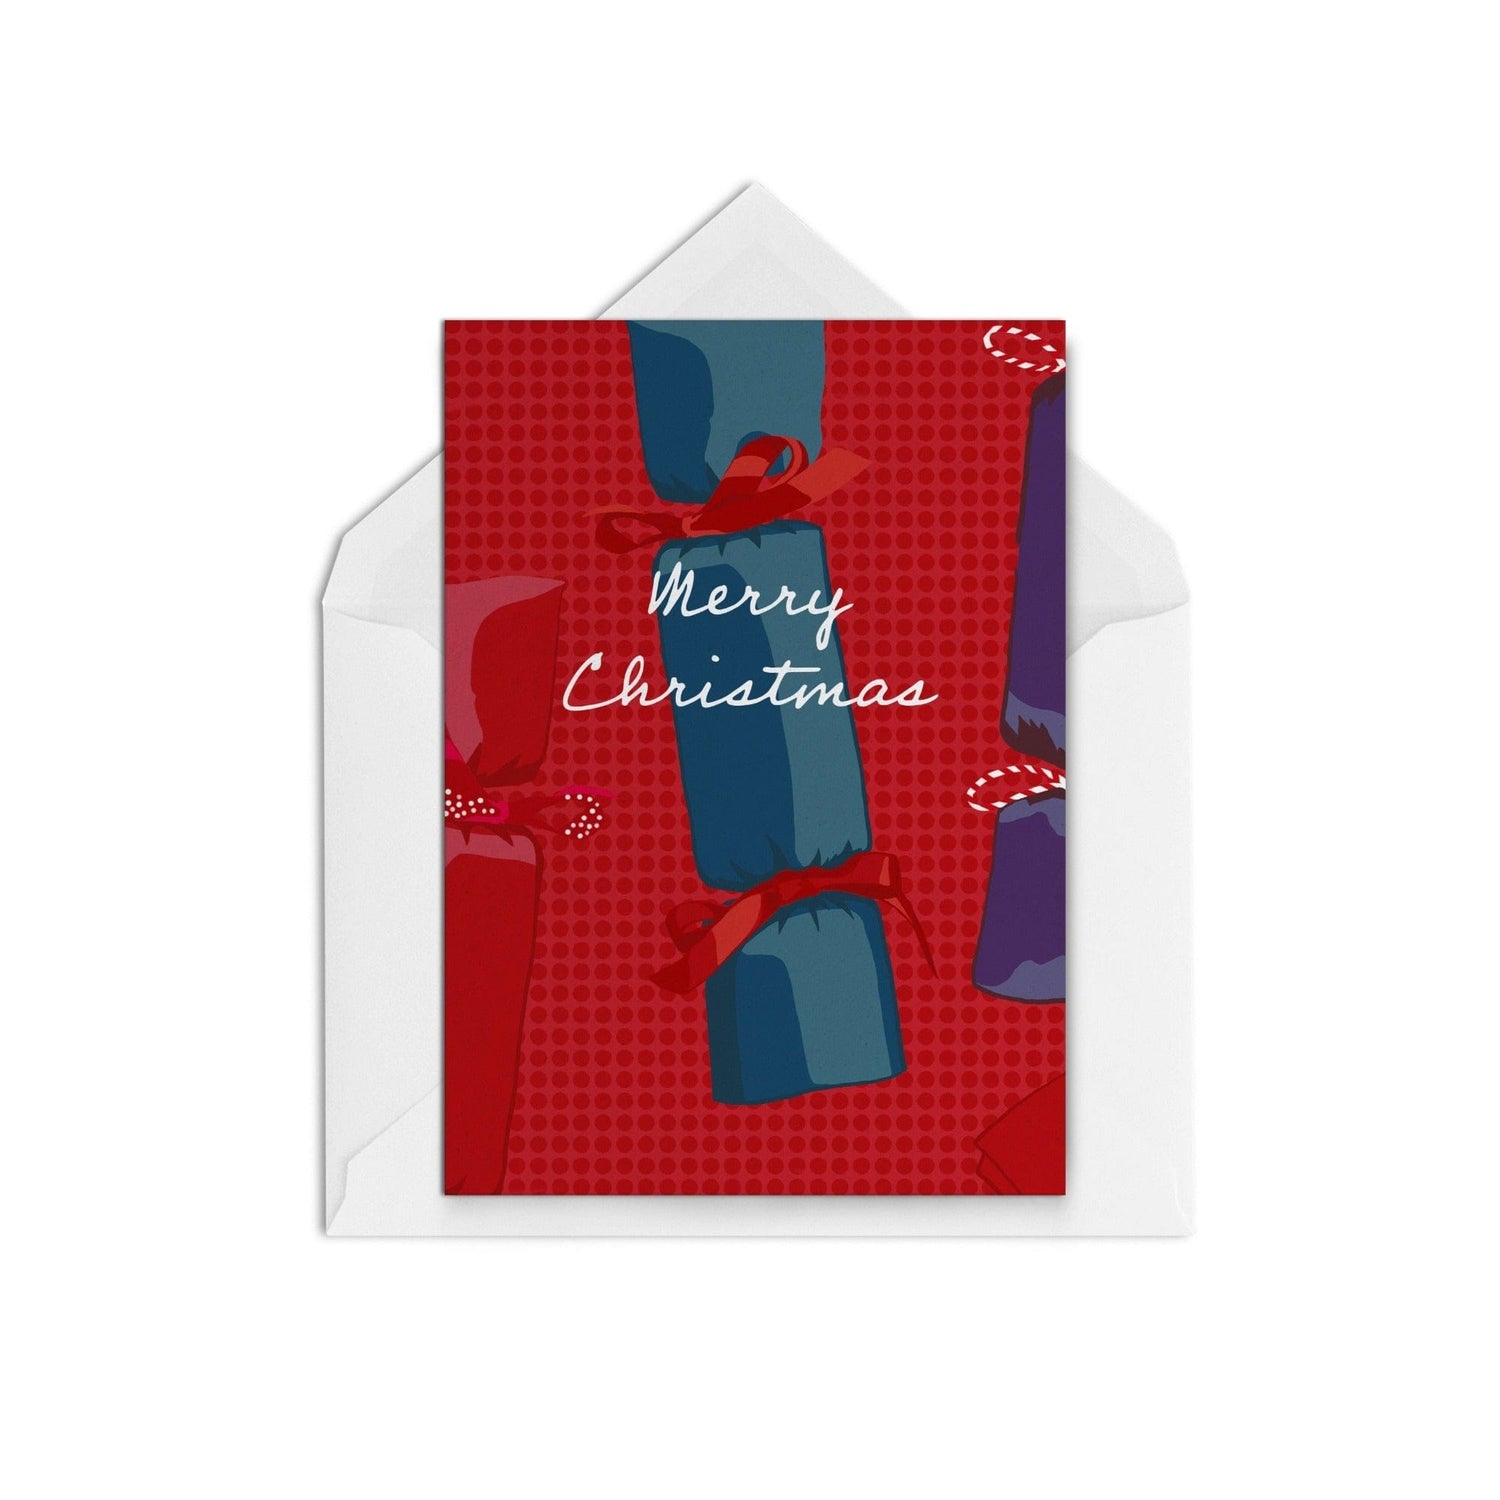 Christmas Crackers Red - The Paper People Greeting Cards